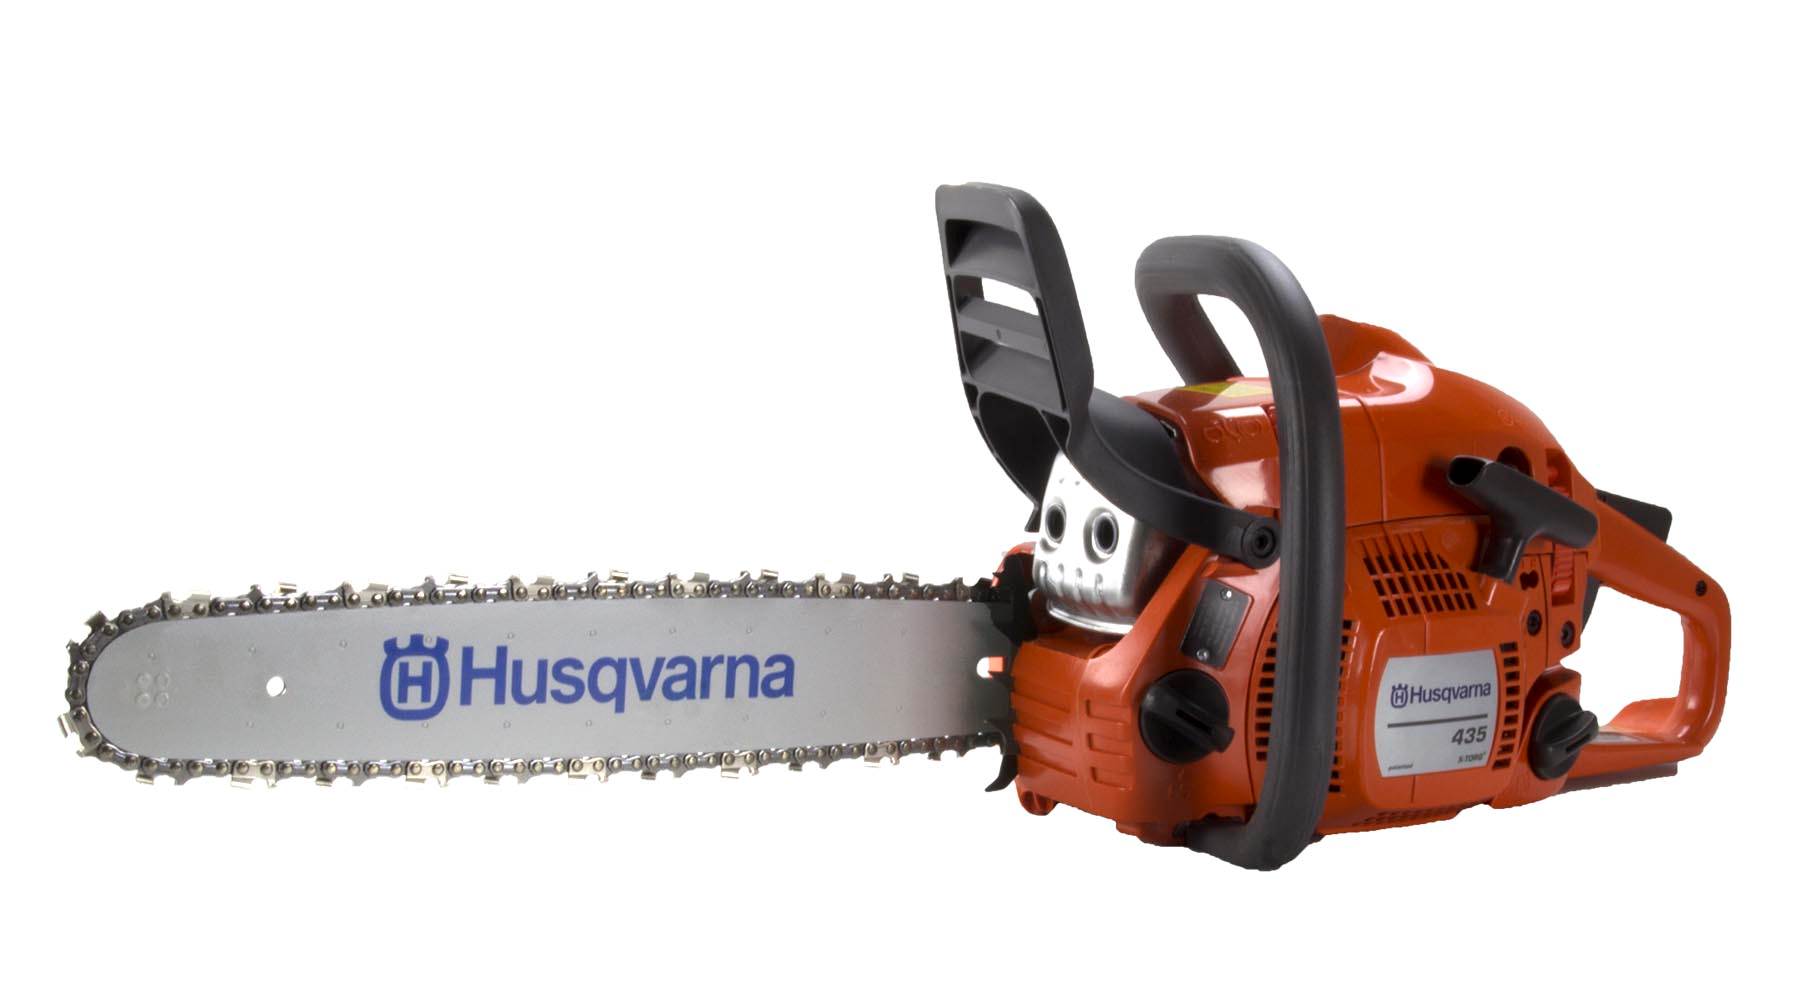 Husqvarna 435-BRC-RB 16″ 2.2hp Gas Powered Chainsaw for sale online